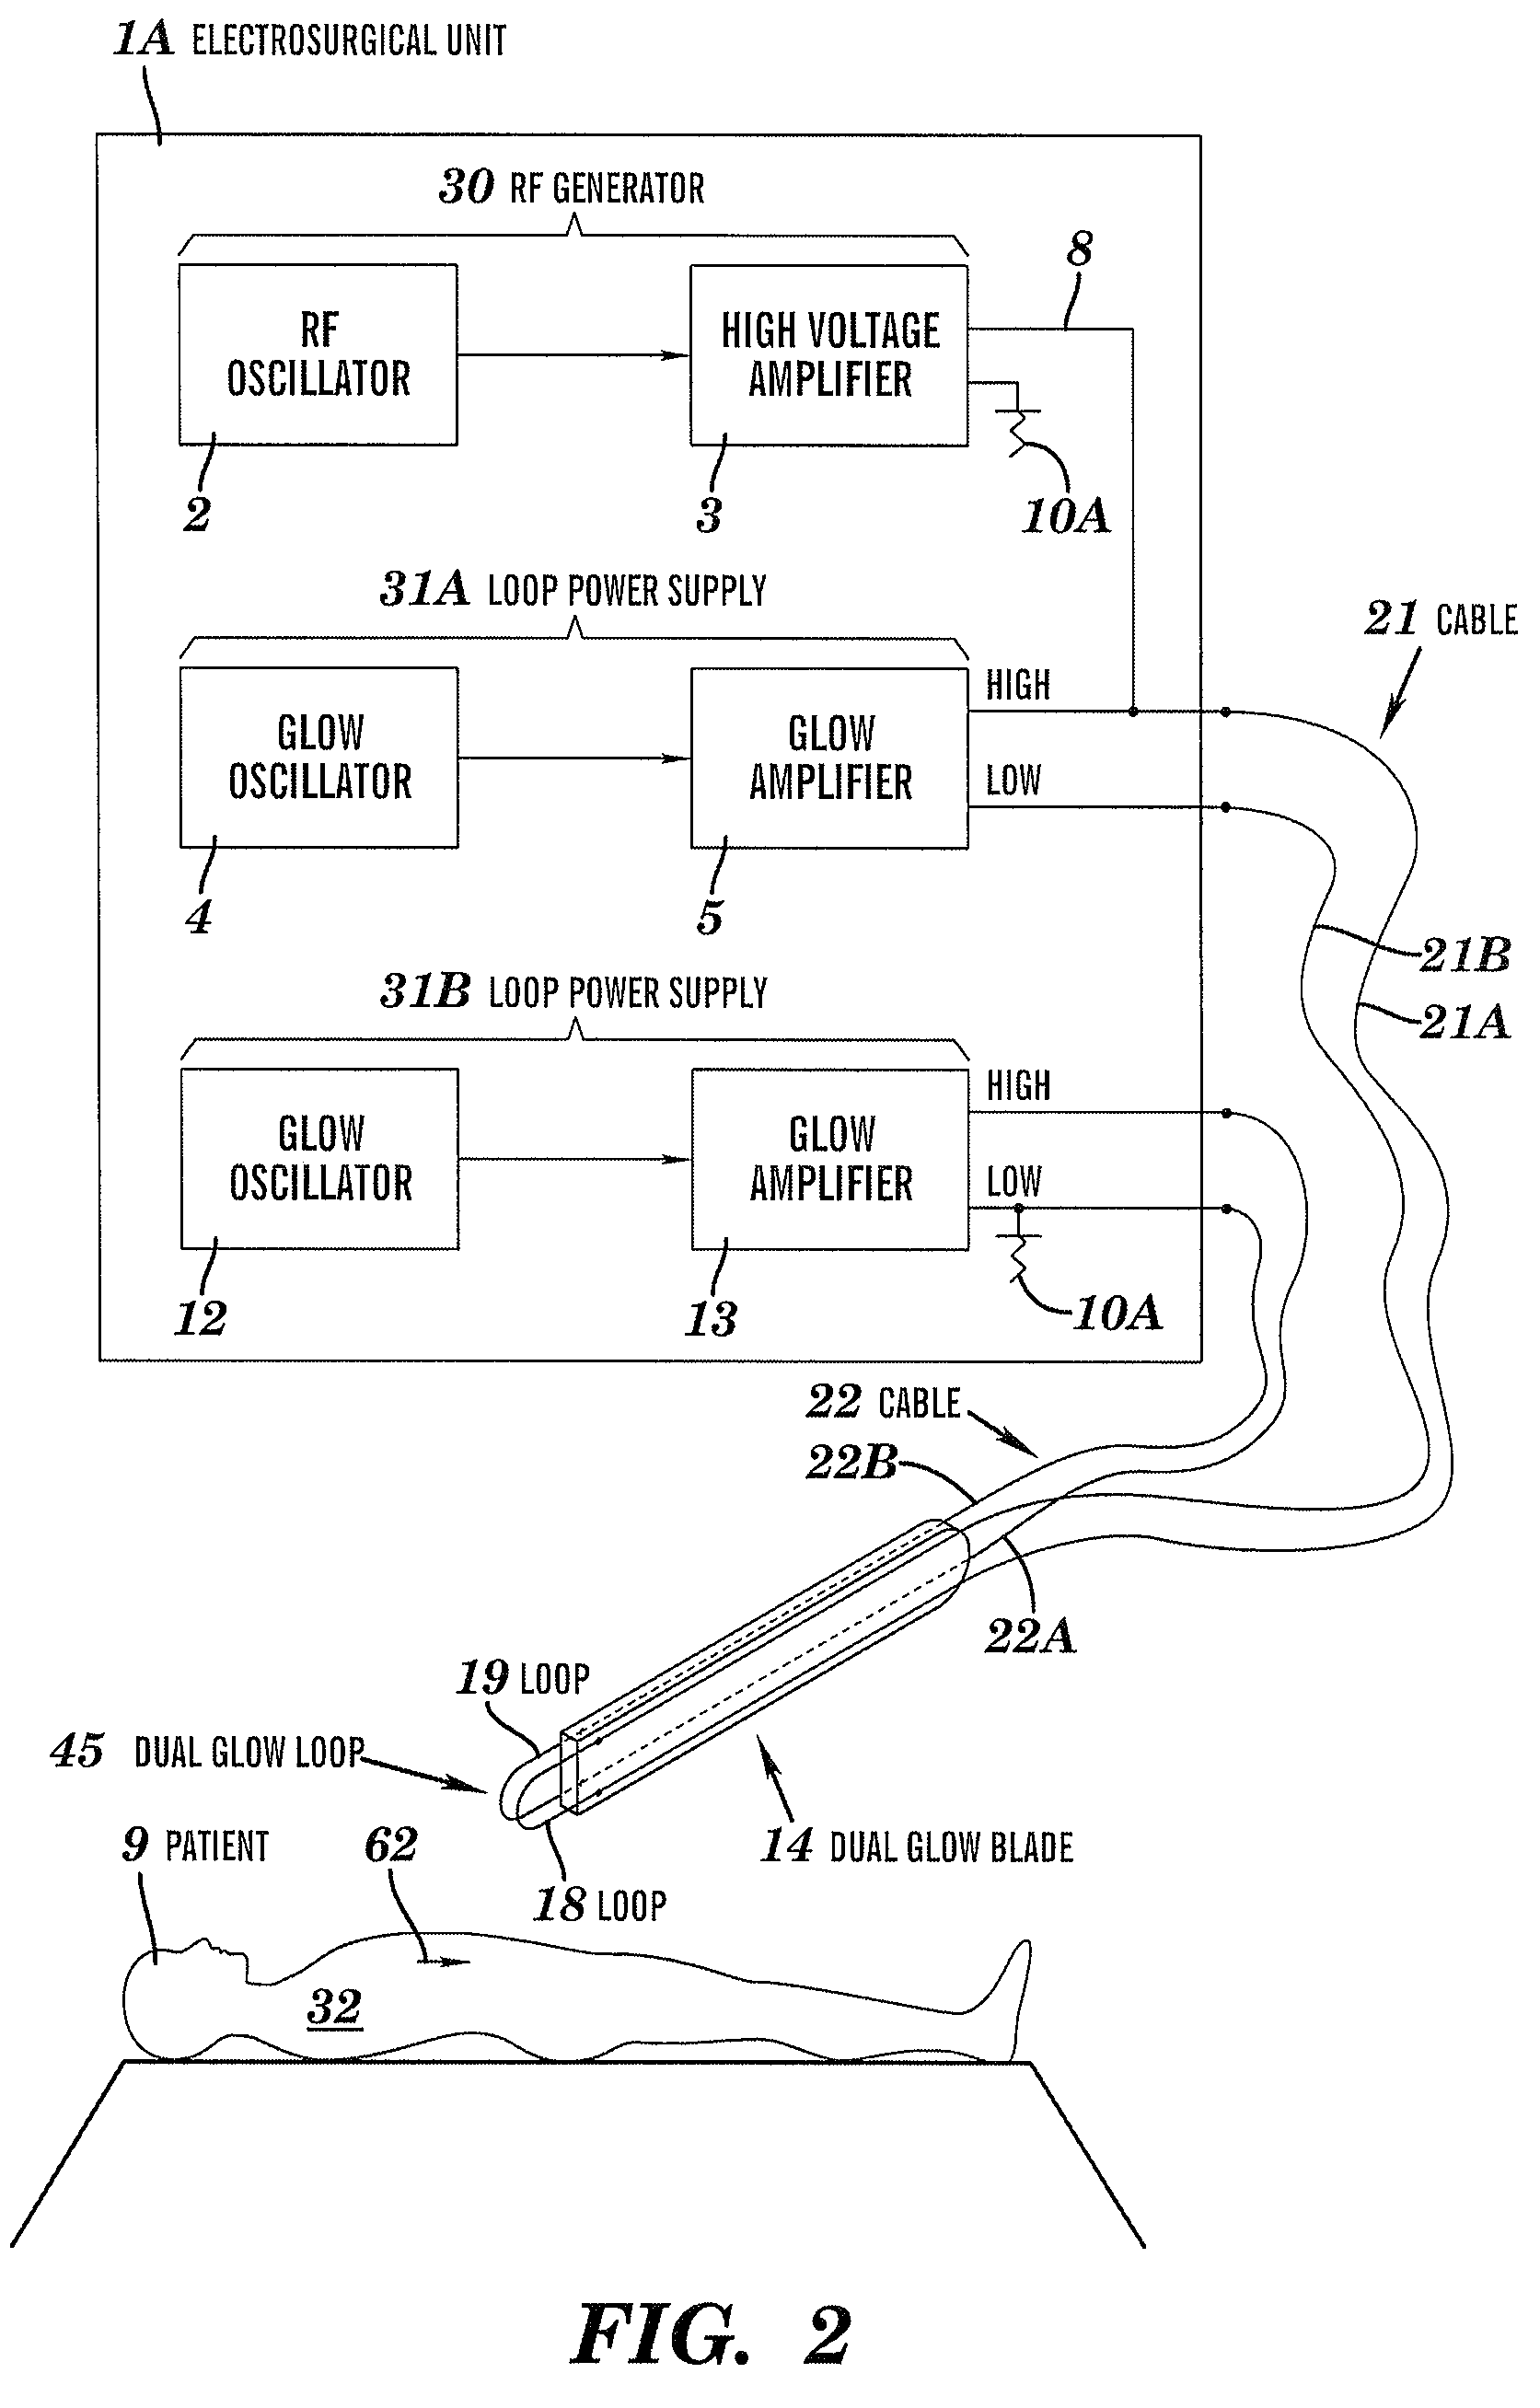 High efficiency, precision electrosurgical apparatus and method